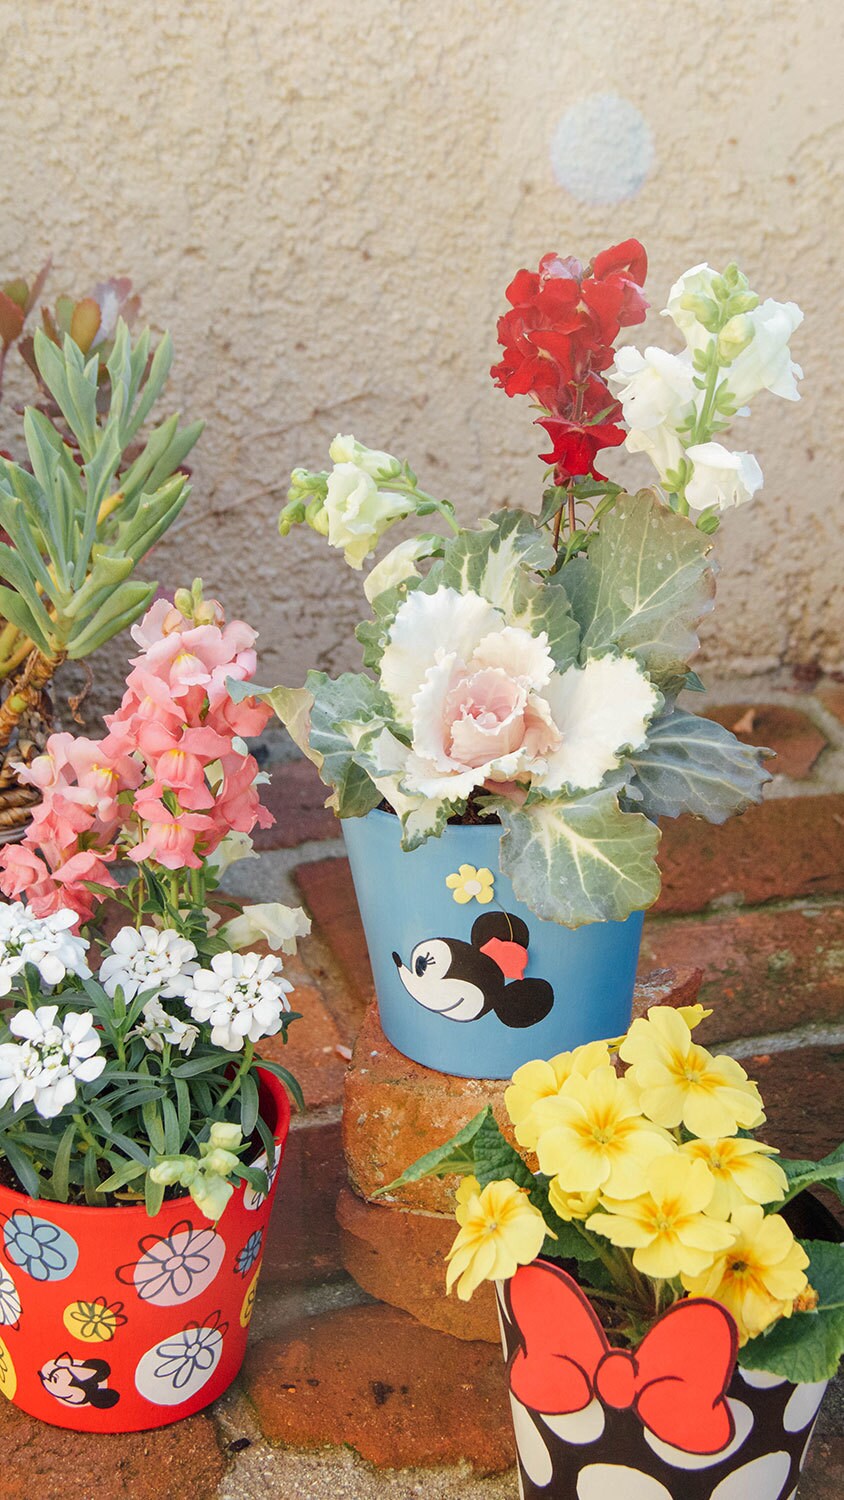 Flowers in various Minnie Mouse themed planters.